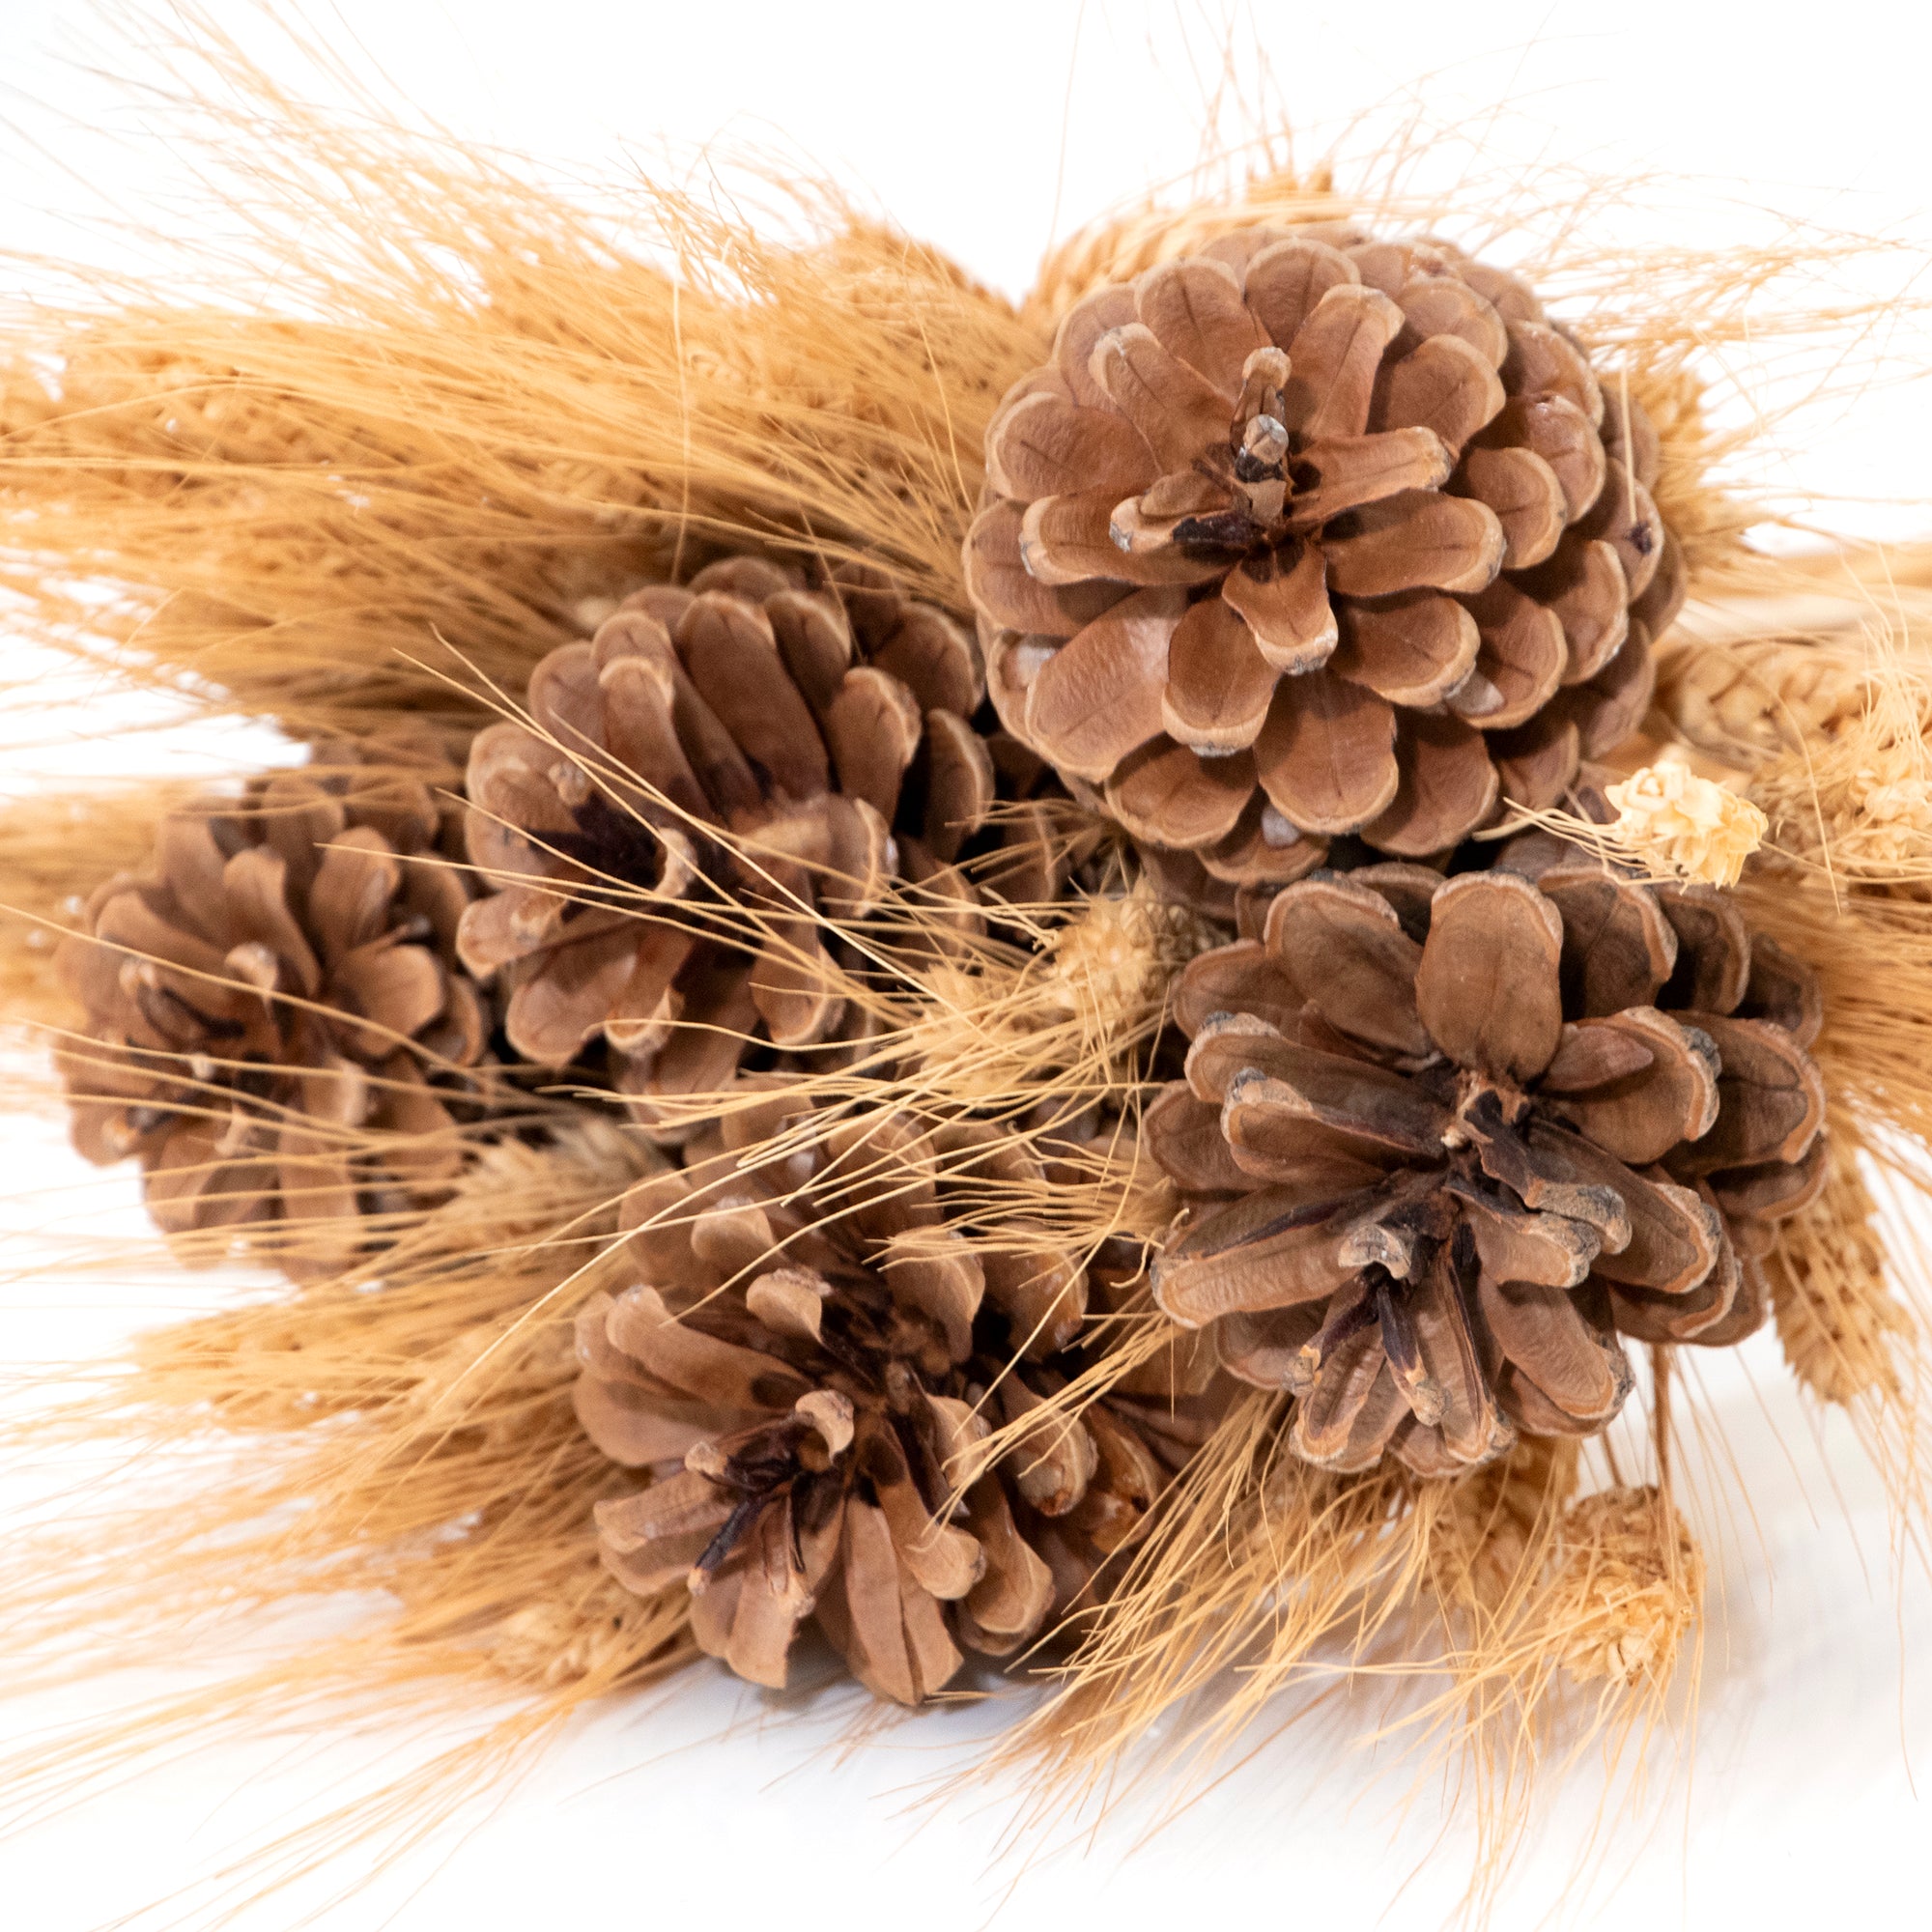 Wheat and Pinecone Rustic Bouquet